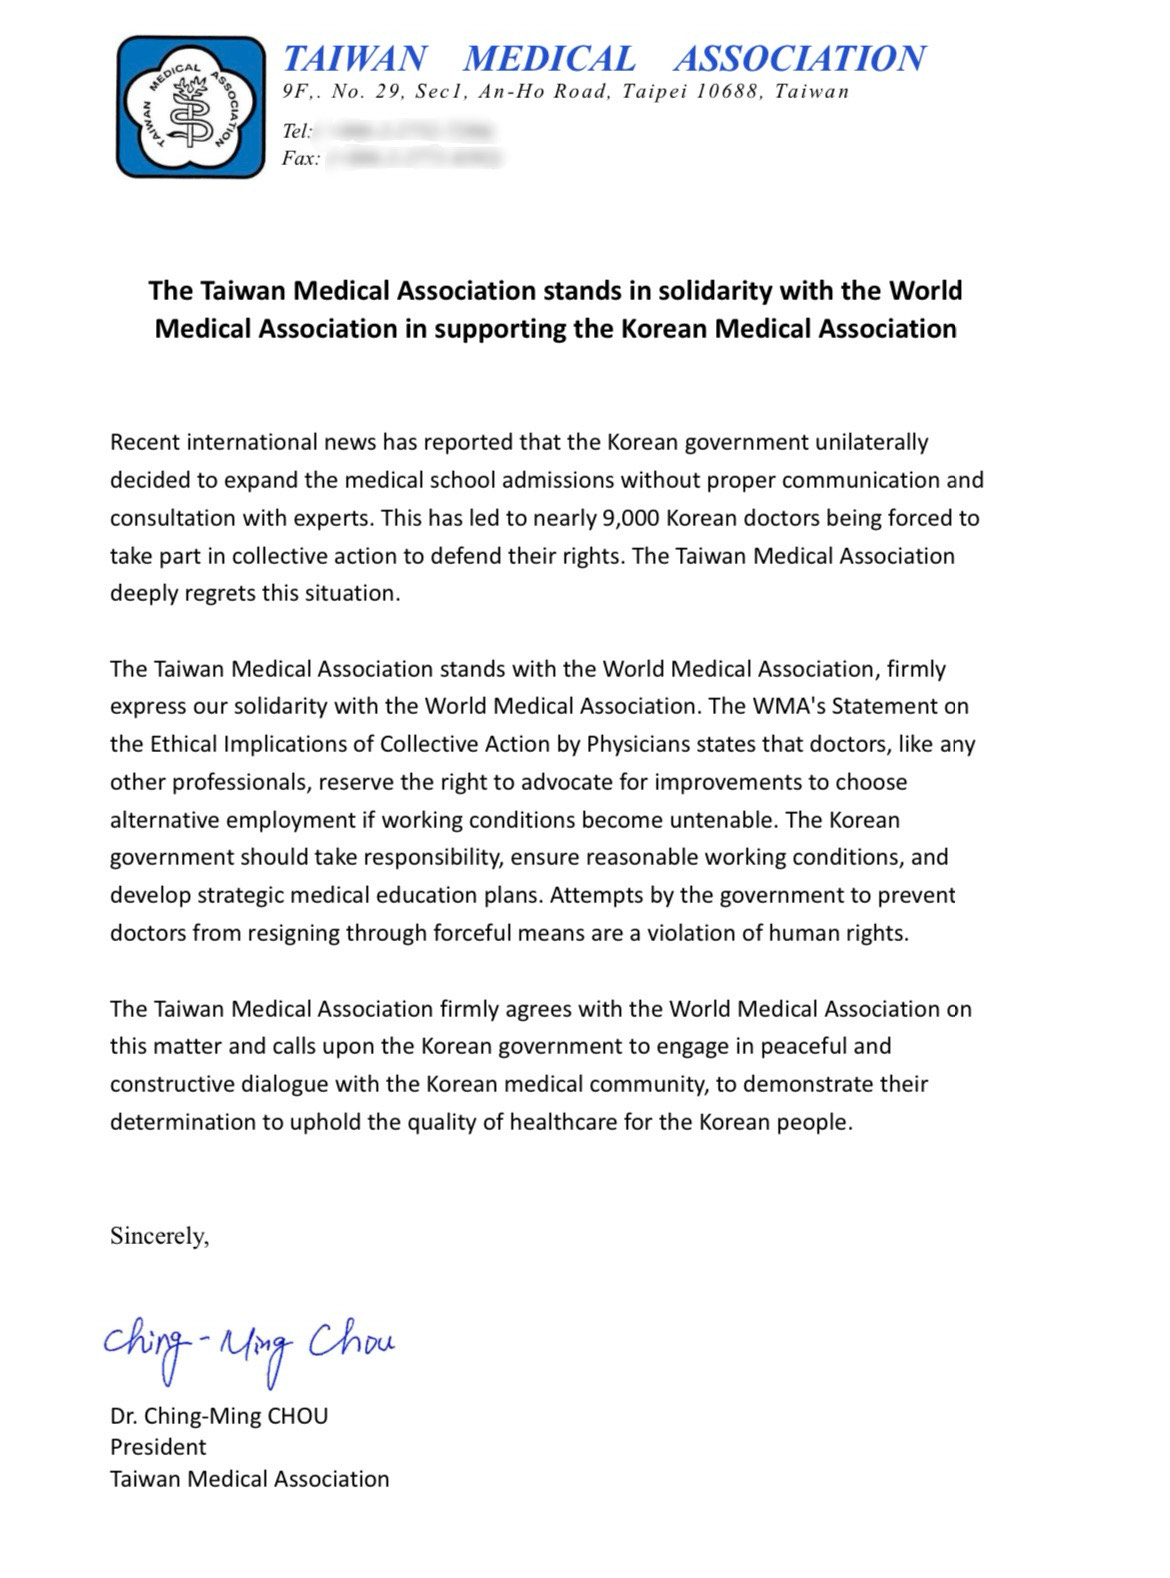 The Taiwan Medical Association issued a statement late Thursday that it stands in solidarity with the World Medical Association in supporting the Korean Medical Association. (Courtesy of the Korean Medical Association)